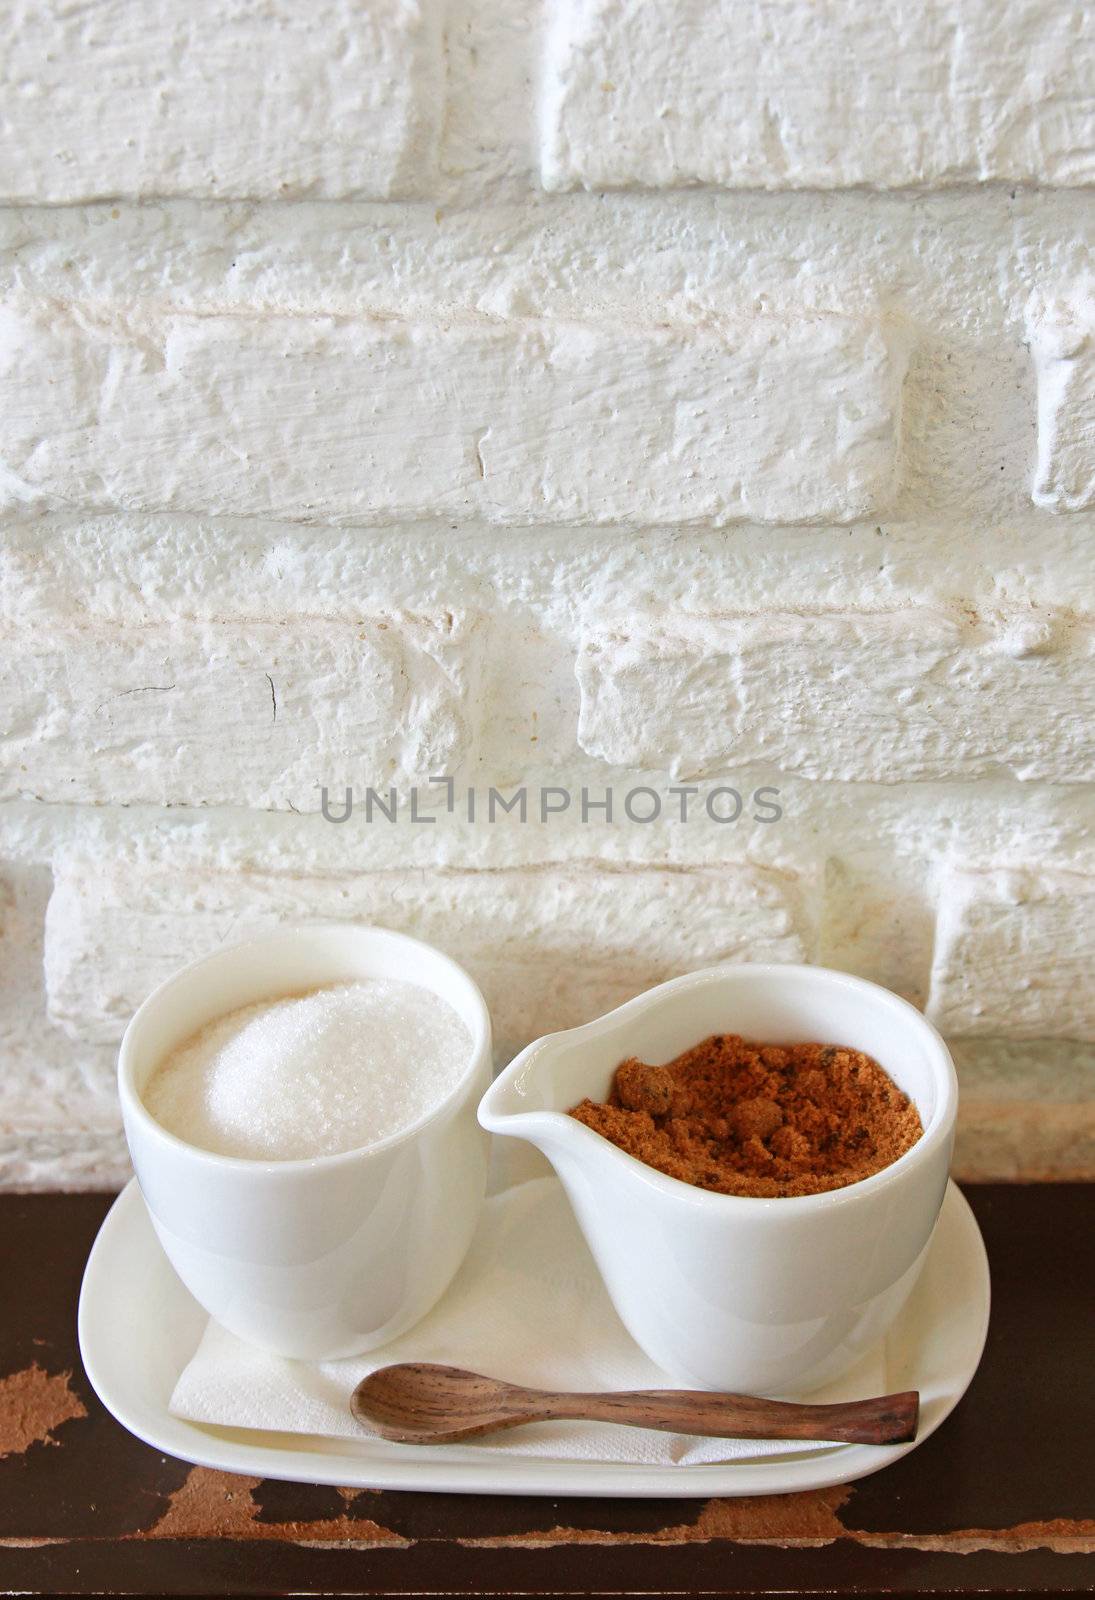 Brown and white sugar in cup with wooden spoon by nuchylee